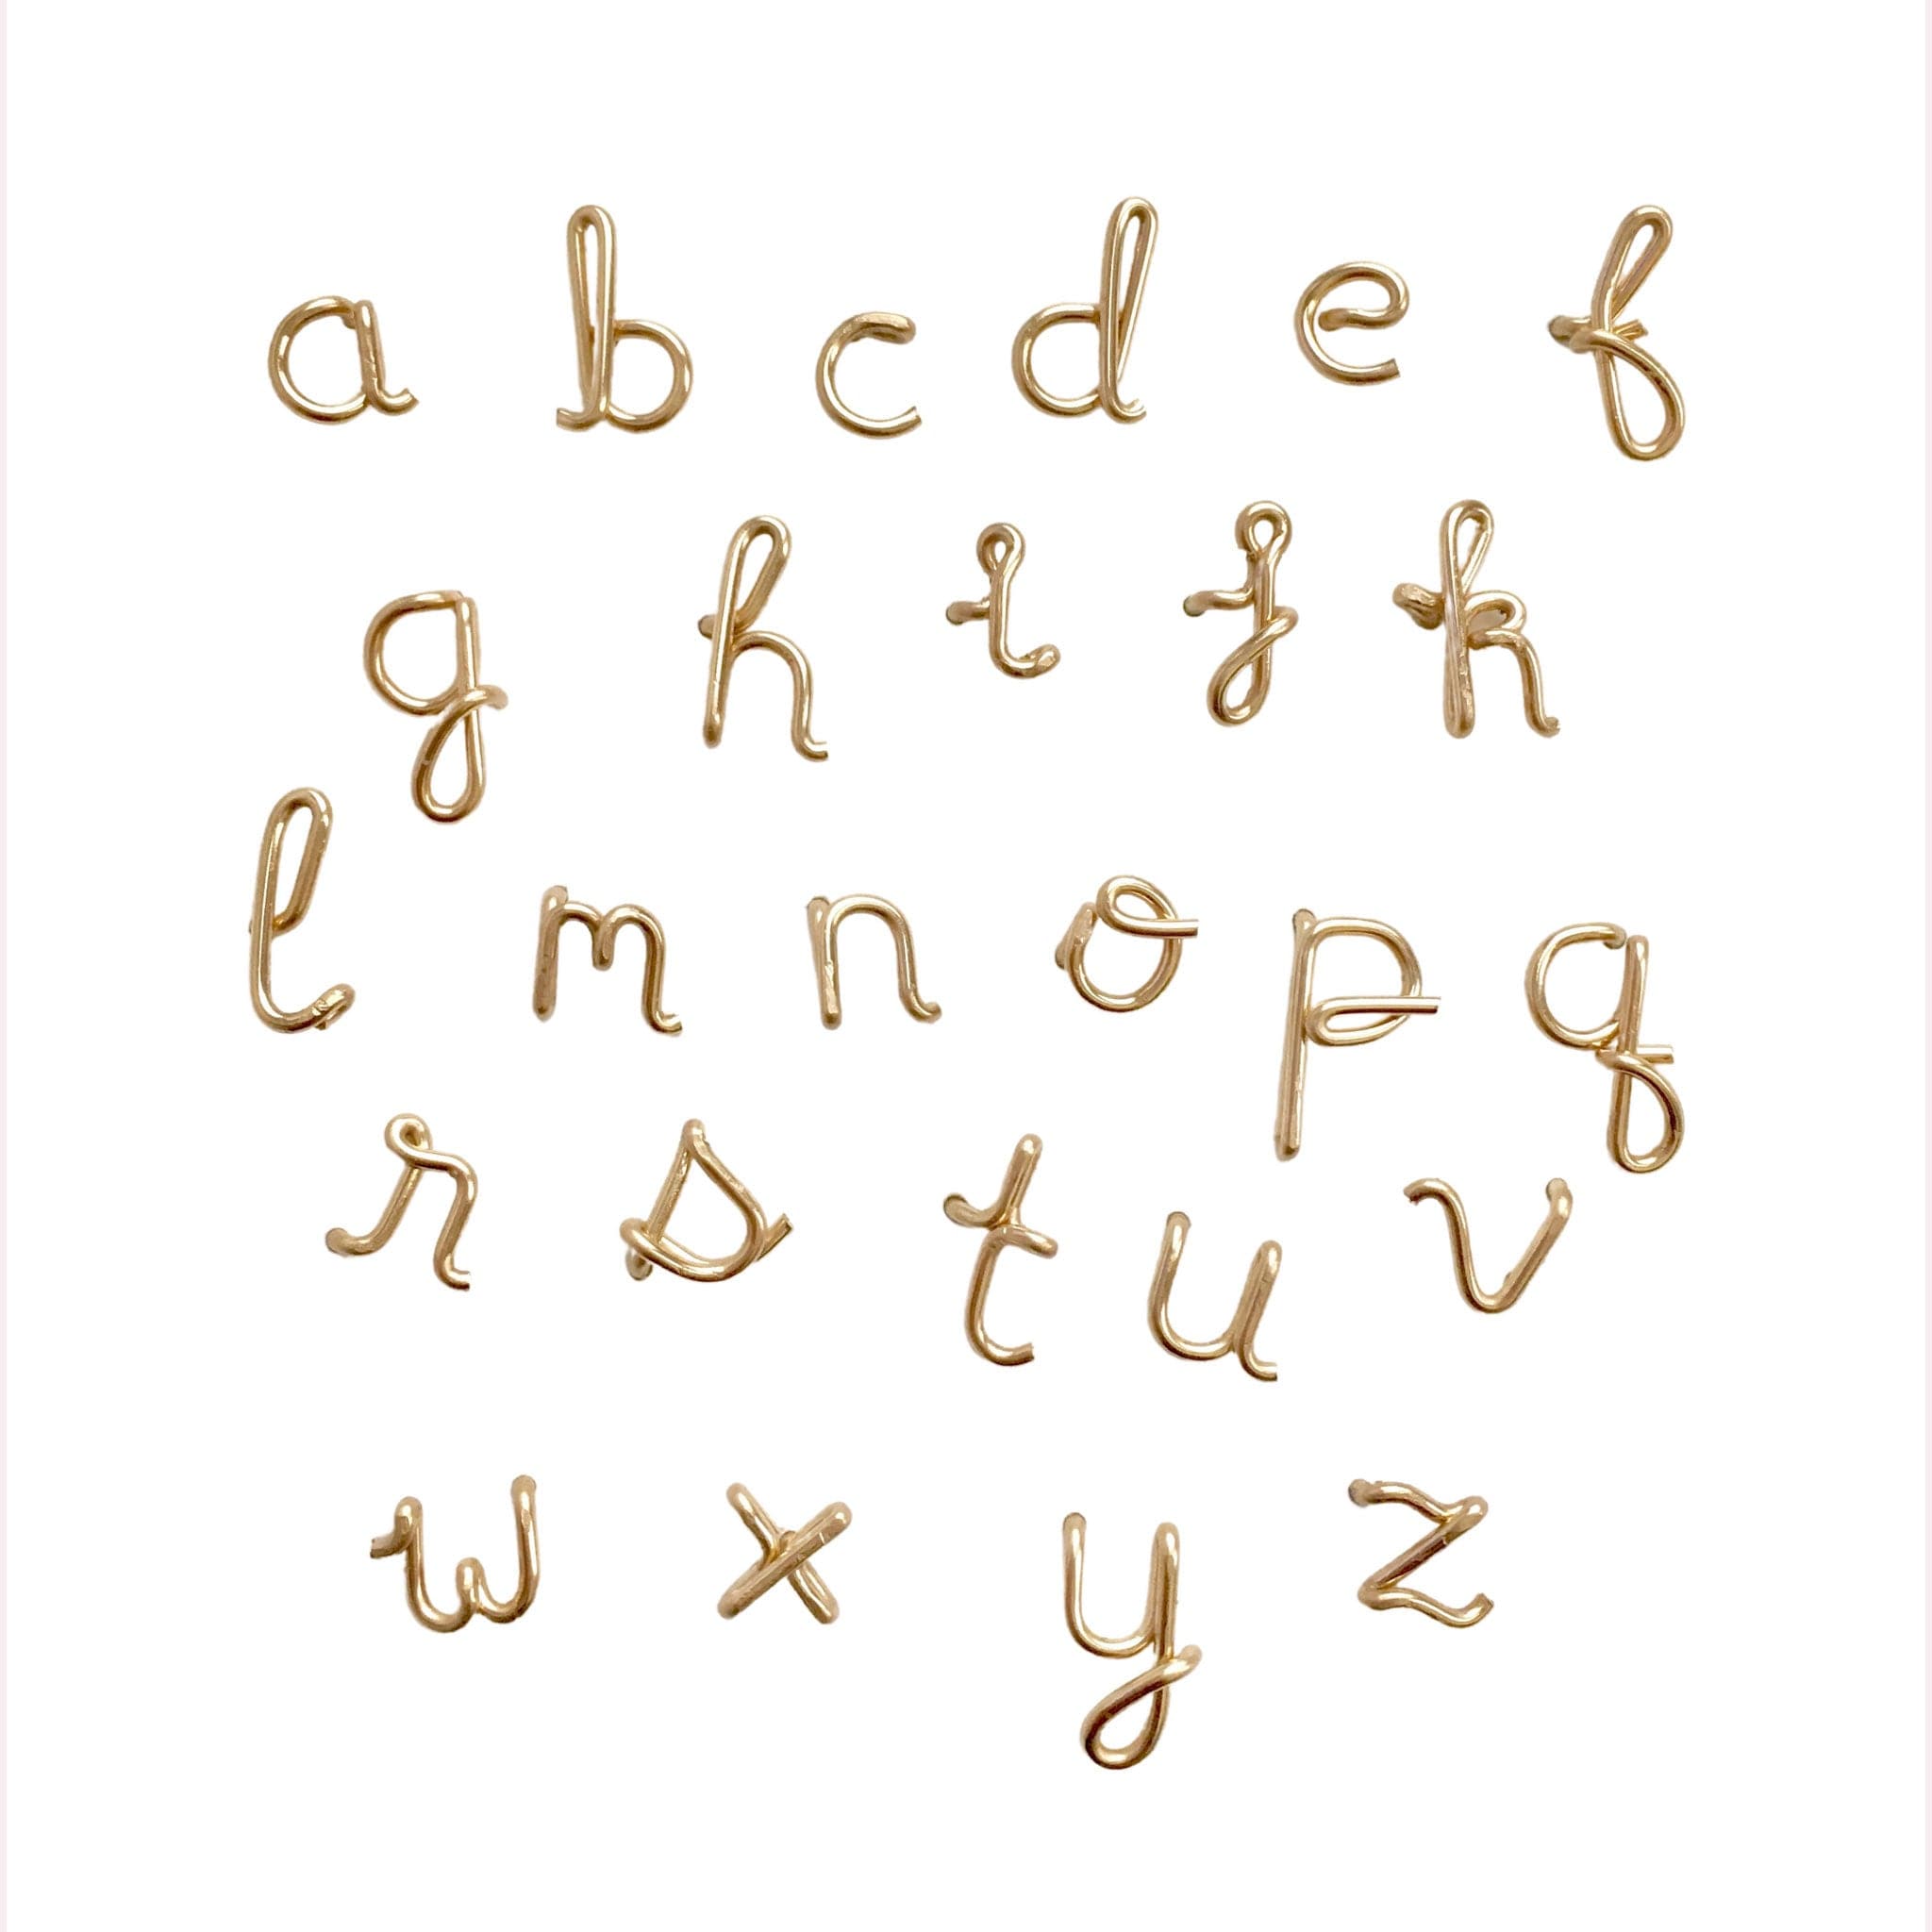 Individual stud earrings of gold wire bent into the shape of lowercase letters. Shown is letters A to Z.